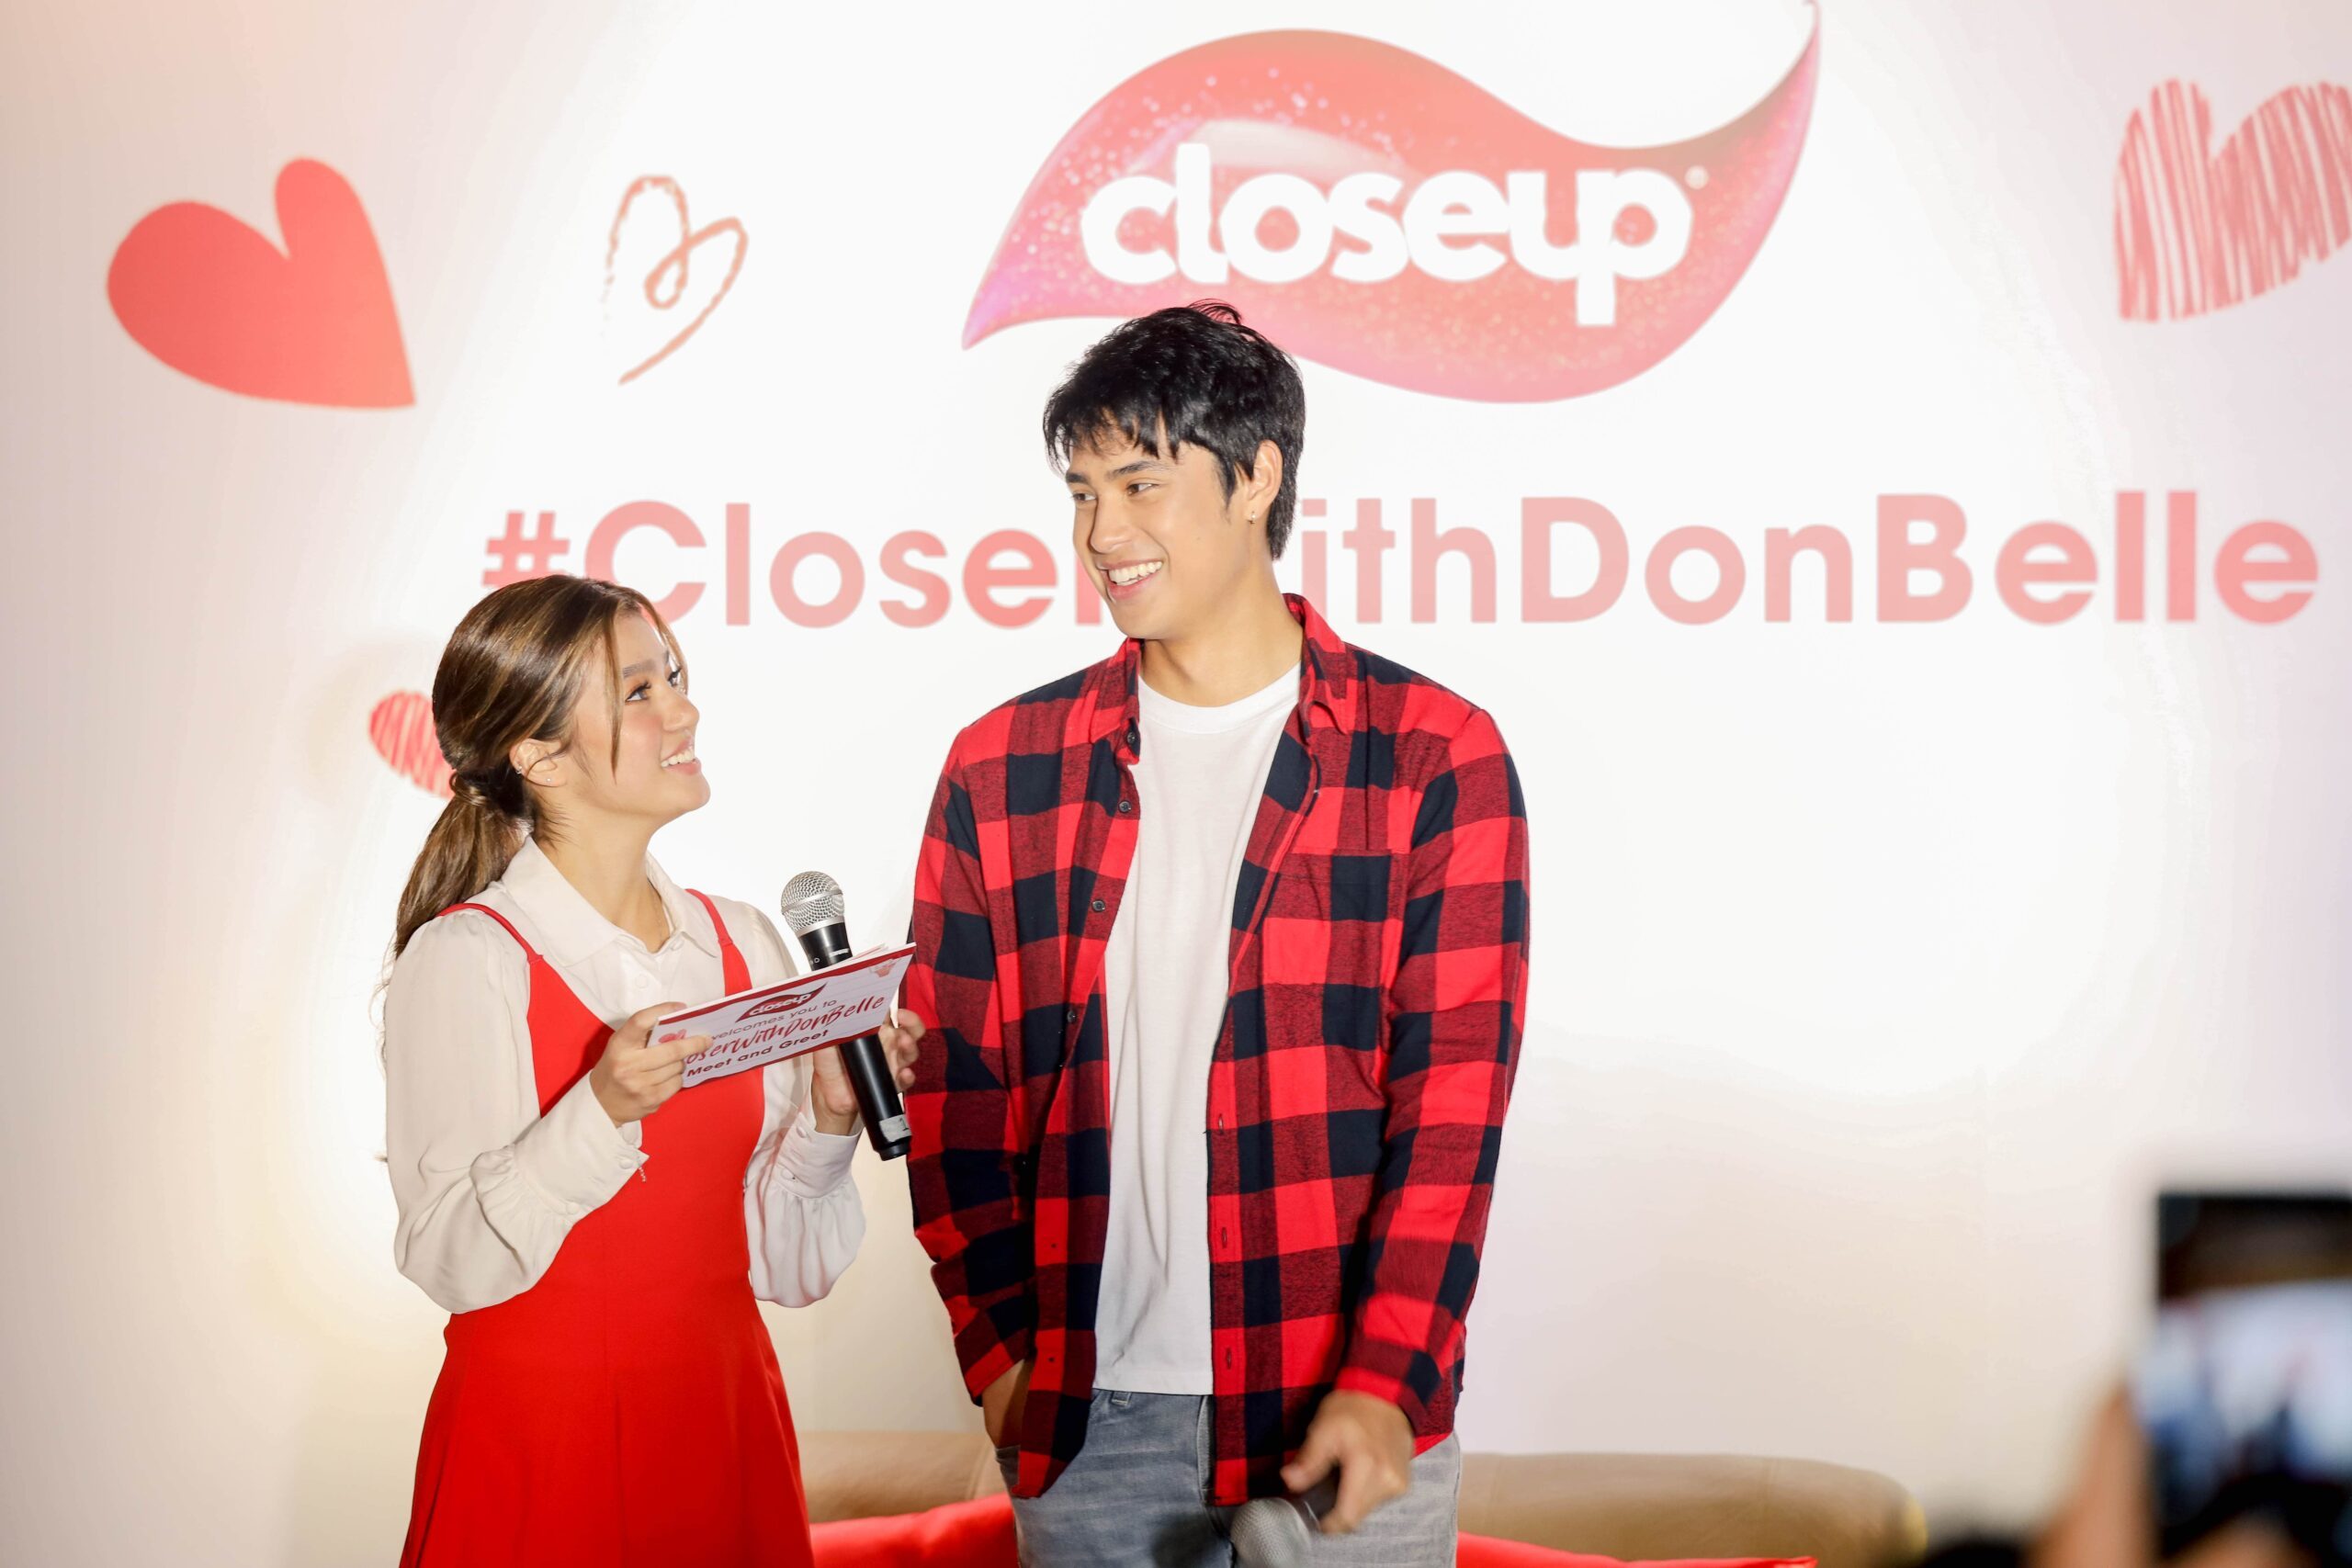 LOOK: DonBelle gets closer with PH fans in intimate fan meet